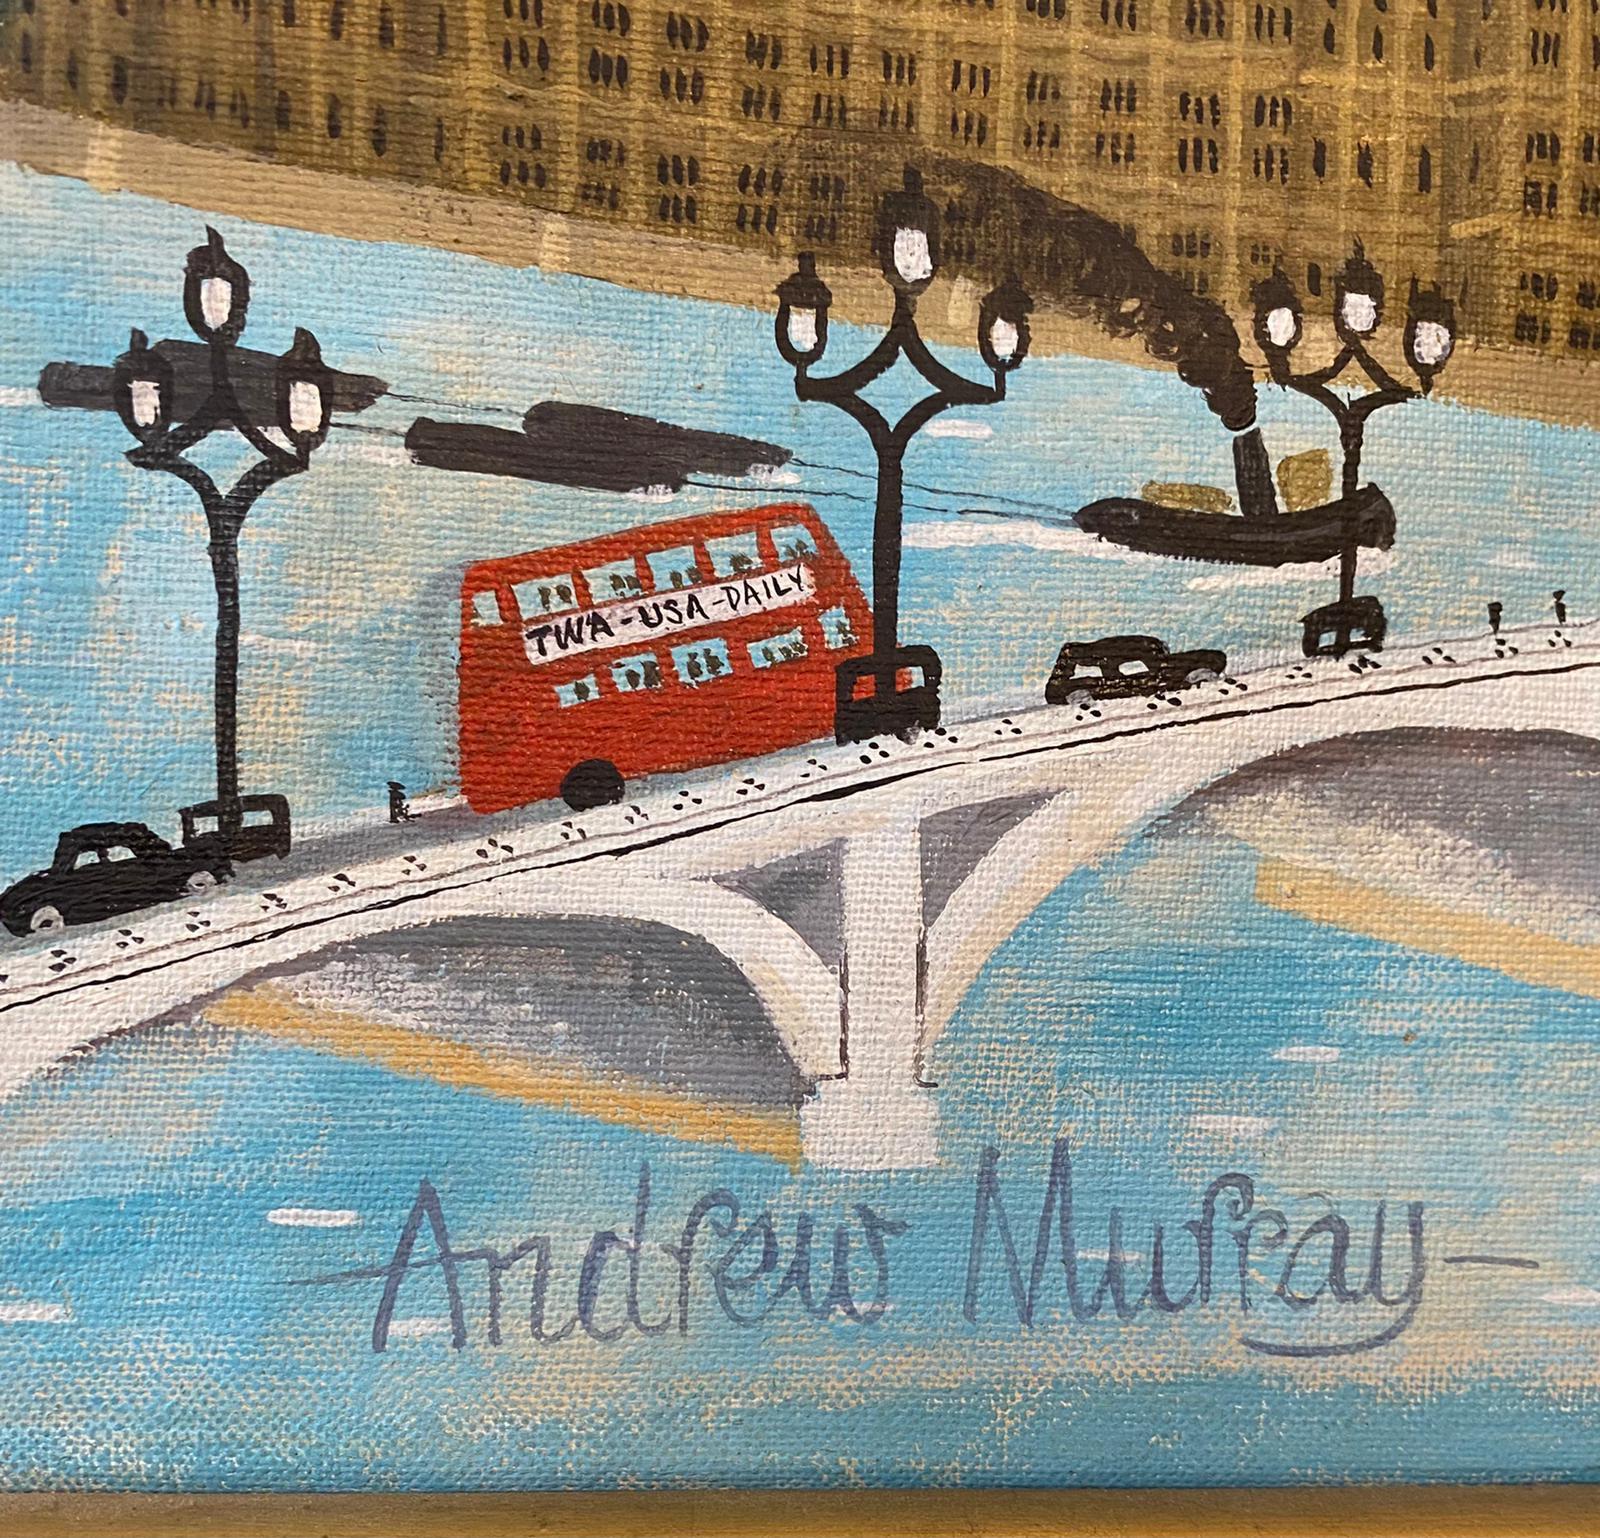 Naive London Street Scene Folk Art Oil Painting Big Ben, Parliament, Union Jack  - Gray Figurative Painting by Andrew Murray